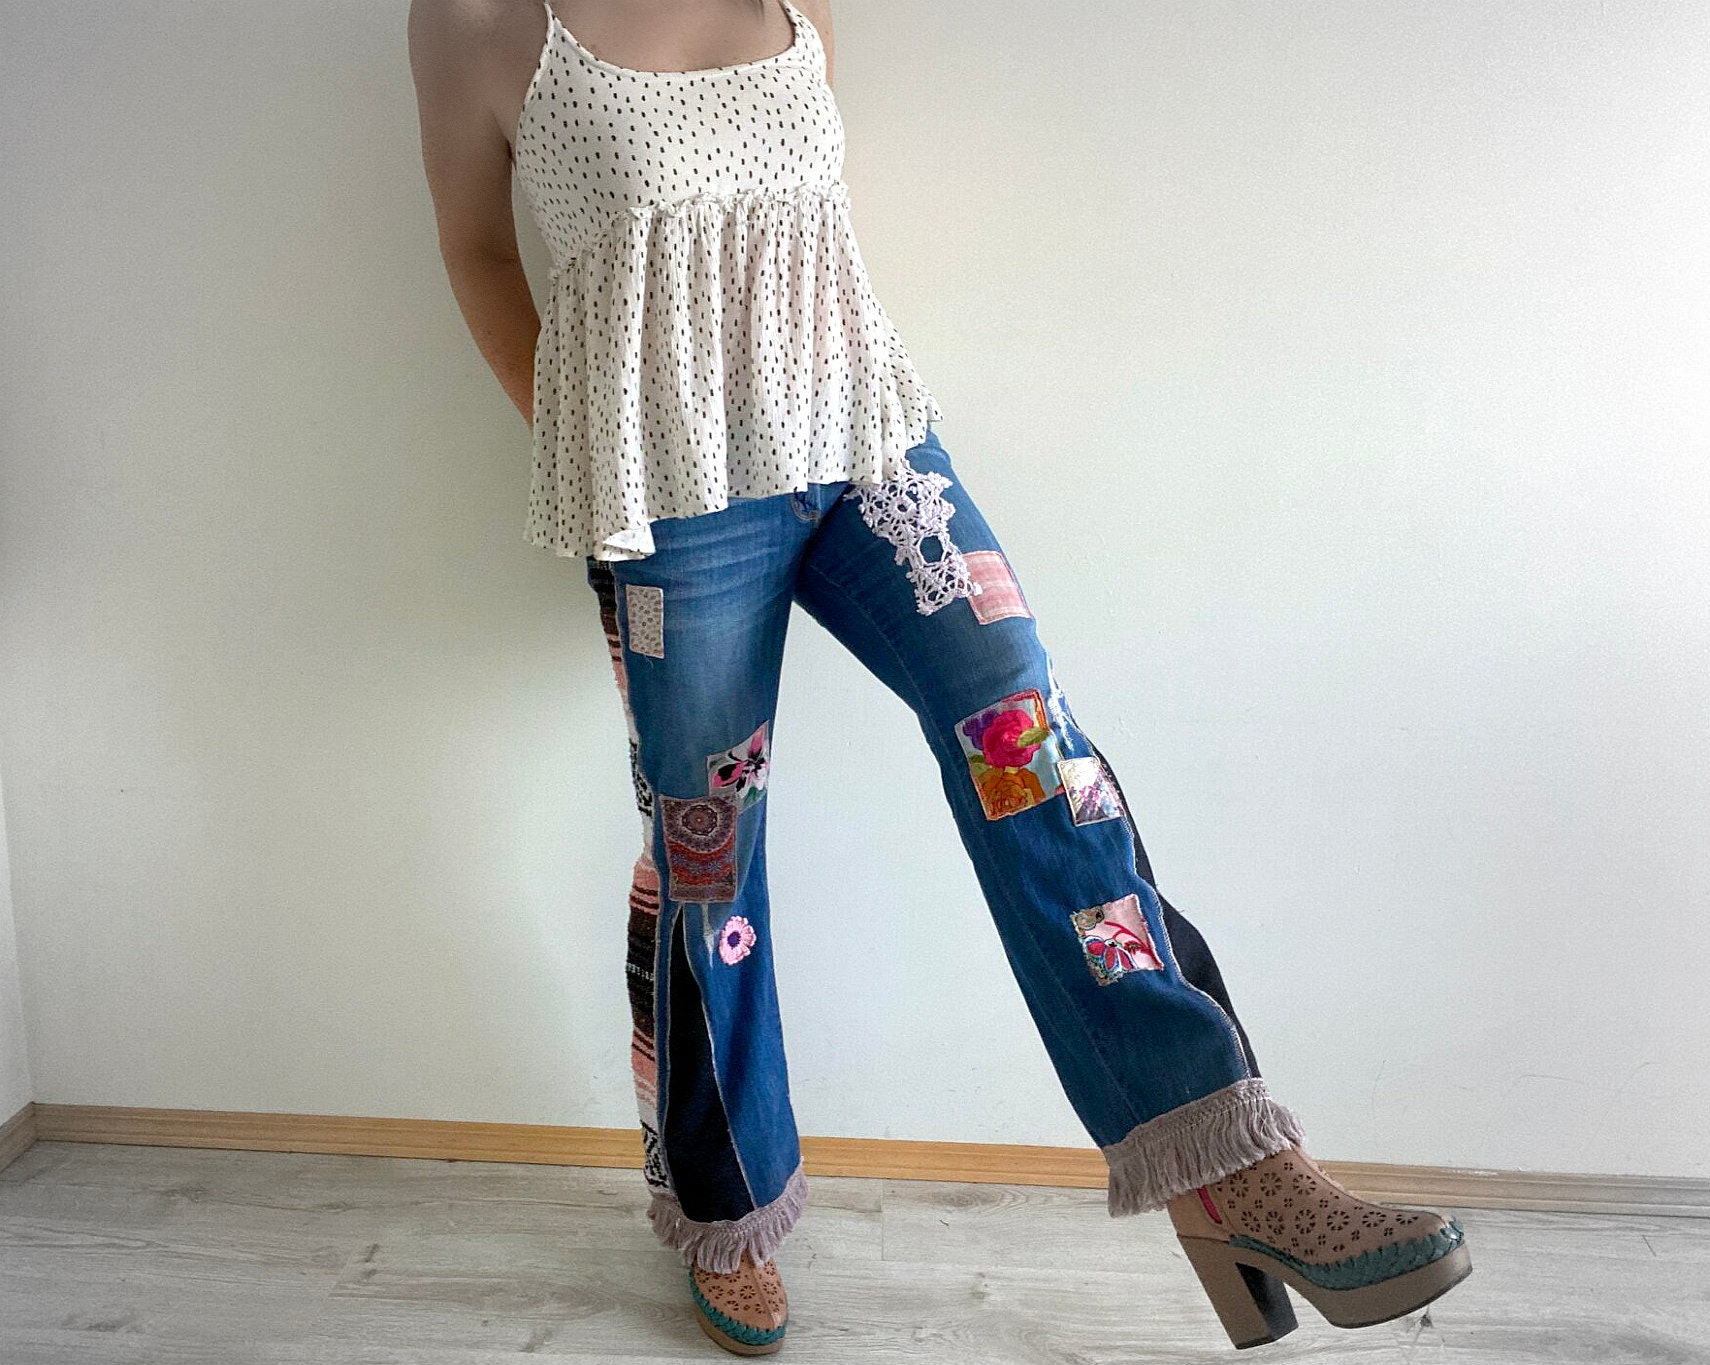 Vintage Wrangler Jeans With Sunflower Fabric Bell Bottoms Size 25 X 32.5 